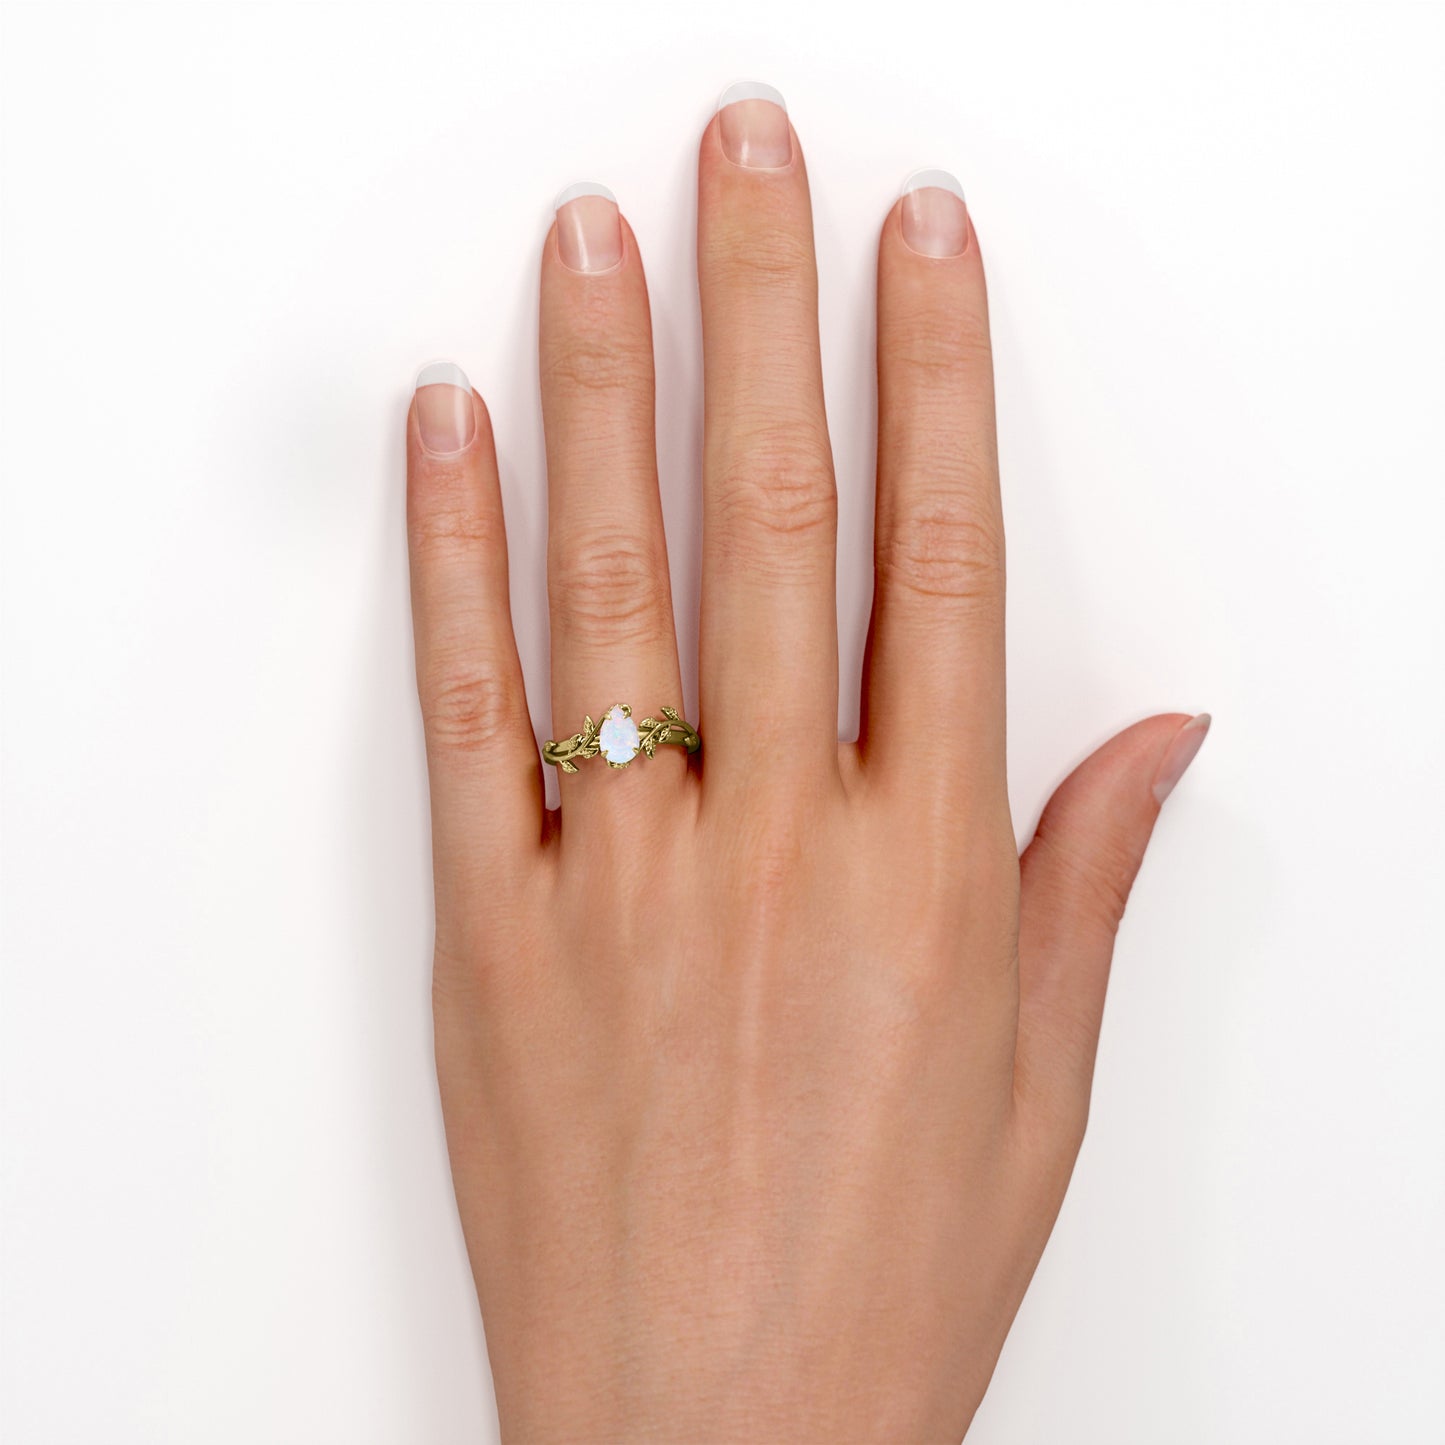 1 carat Pear cut Ethiopian Opal Vintage Engagement ring in Yellow gold